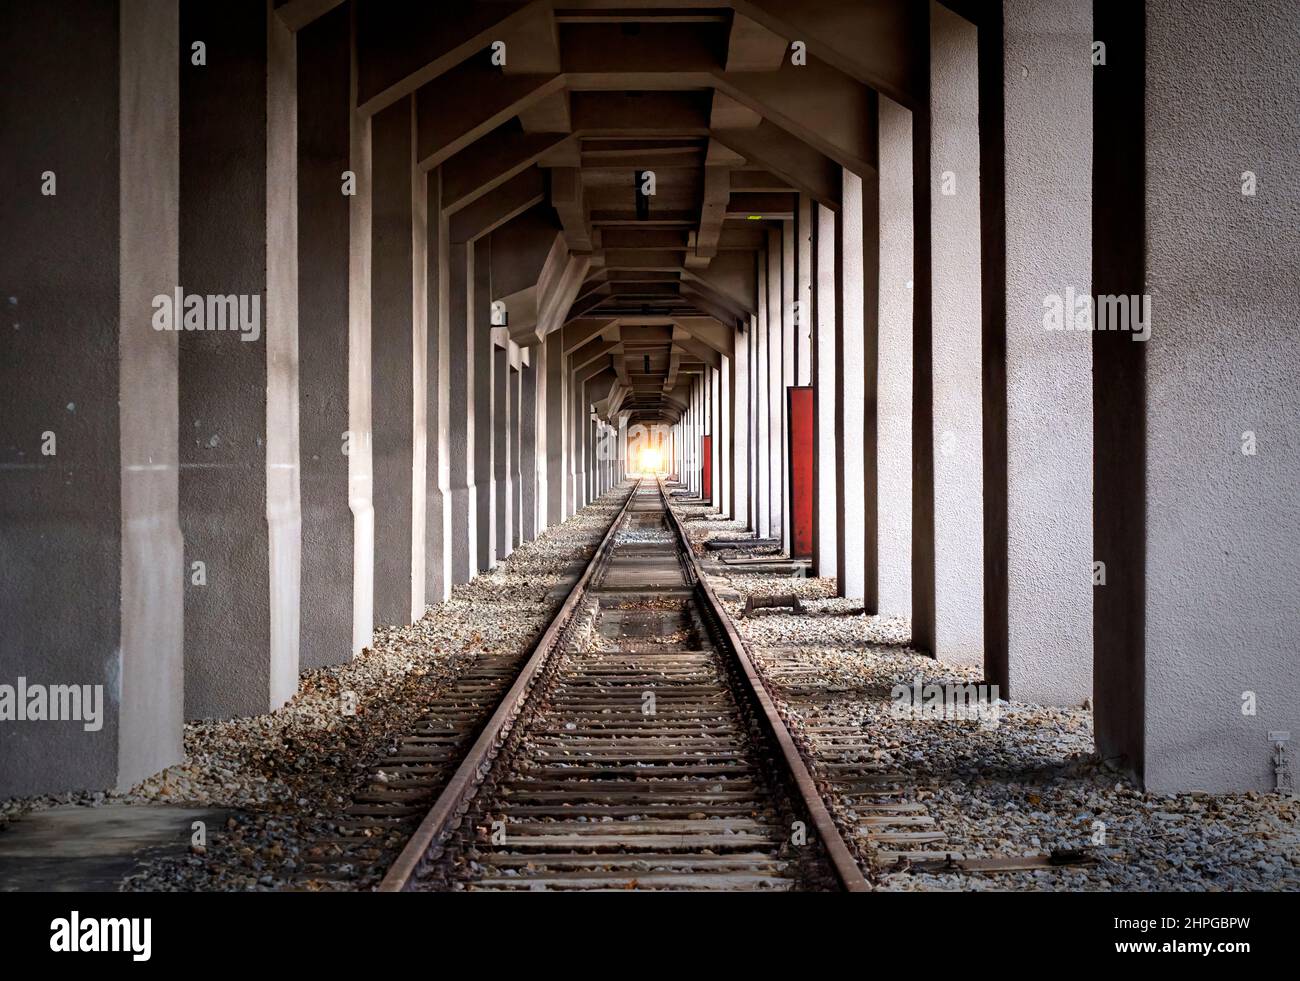 Endless rails in central perspective between close standing concrete pillars with light in vanishing point of perspective, composite Stock Photo